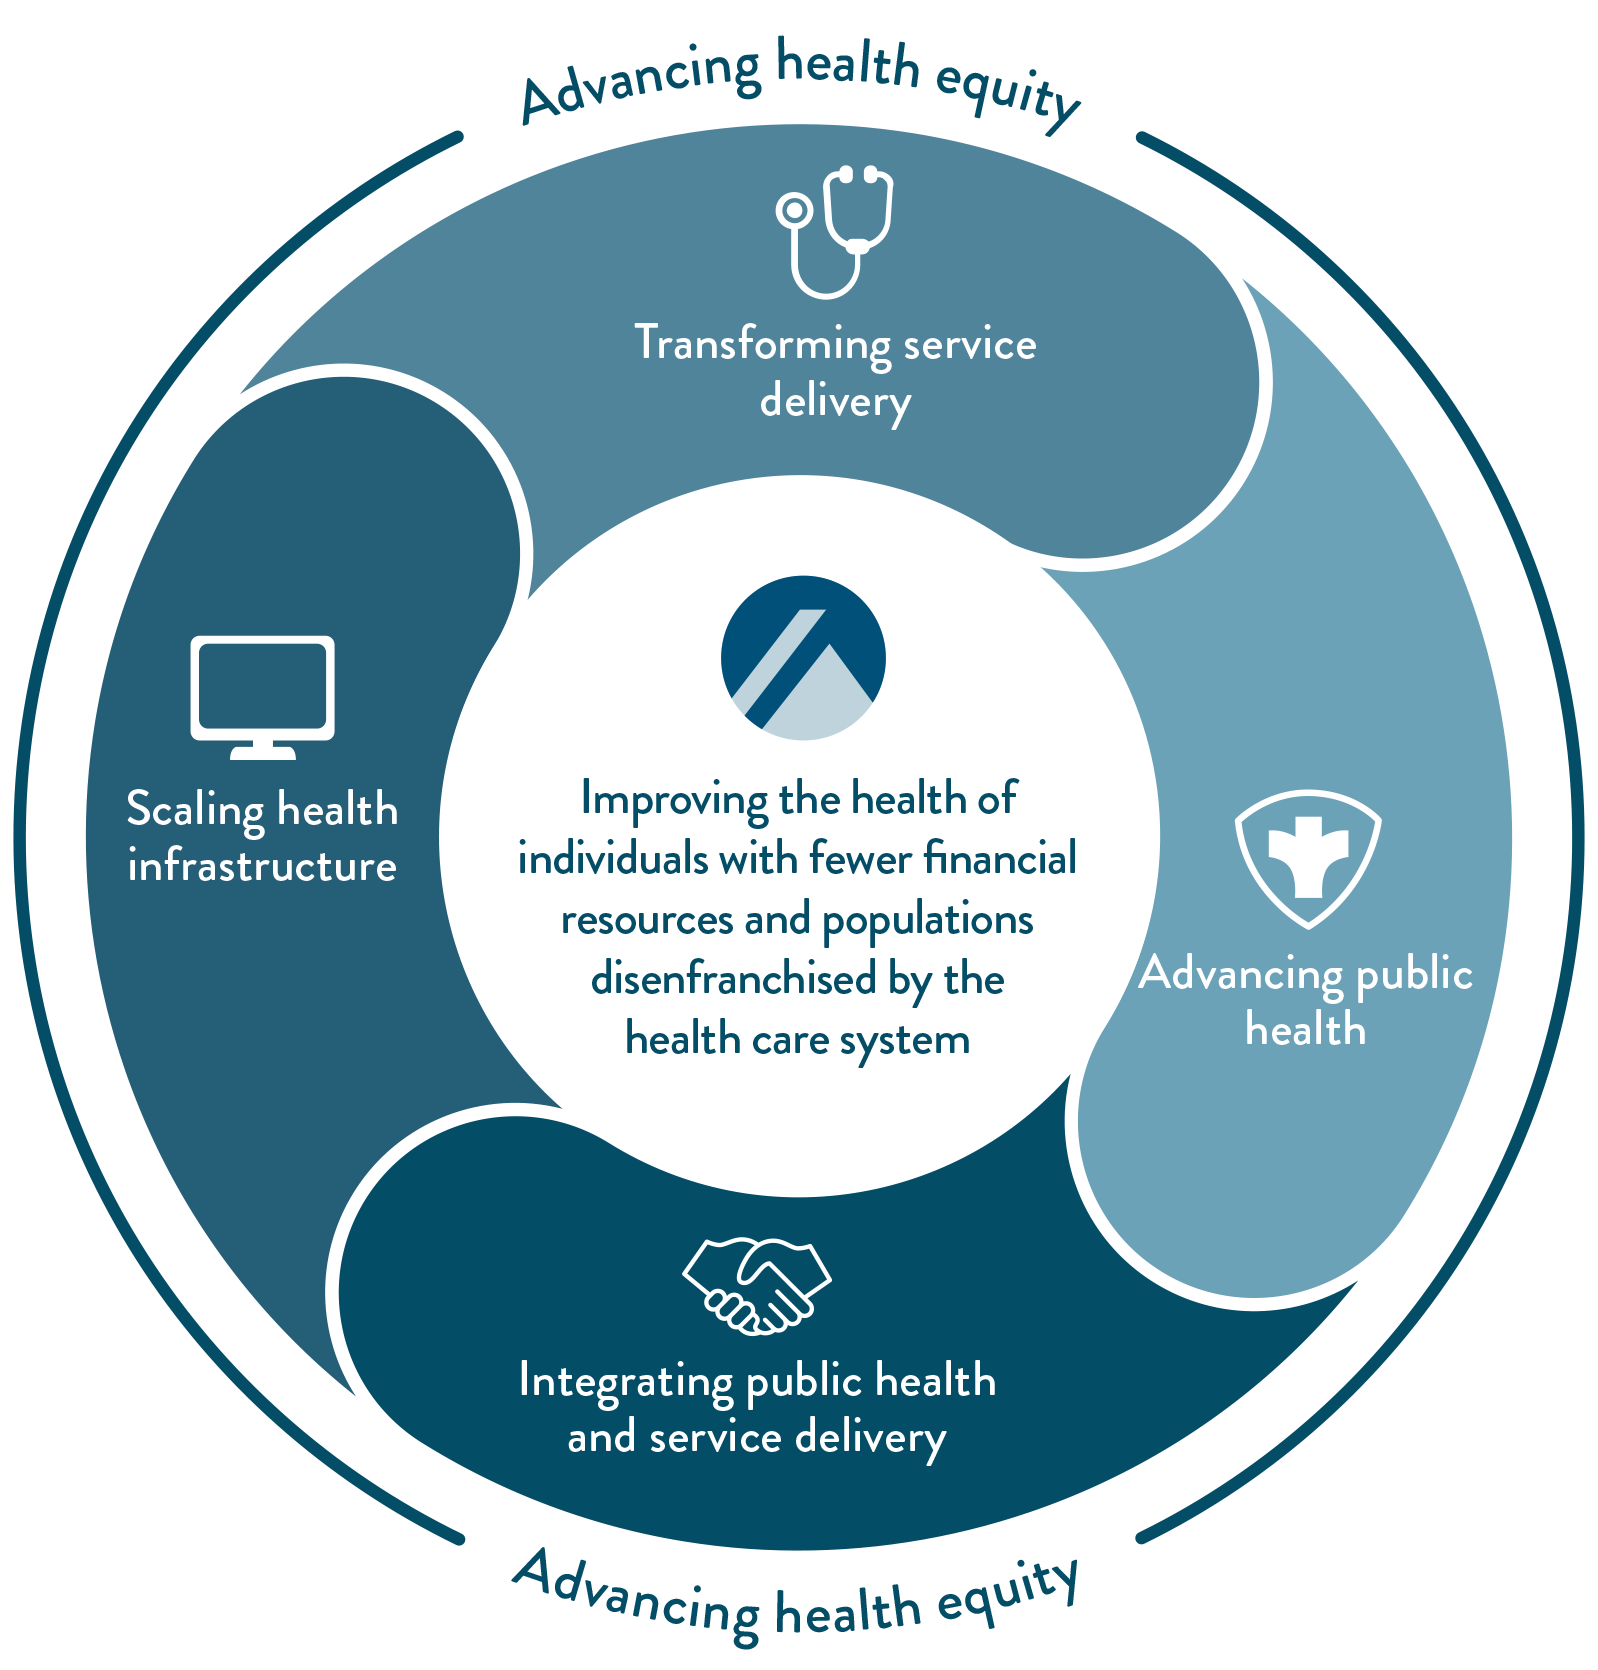 Infographic - Advancing Health Equity through scaling health infrastructure, advancing public health, and integrating public health and delivery service.